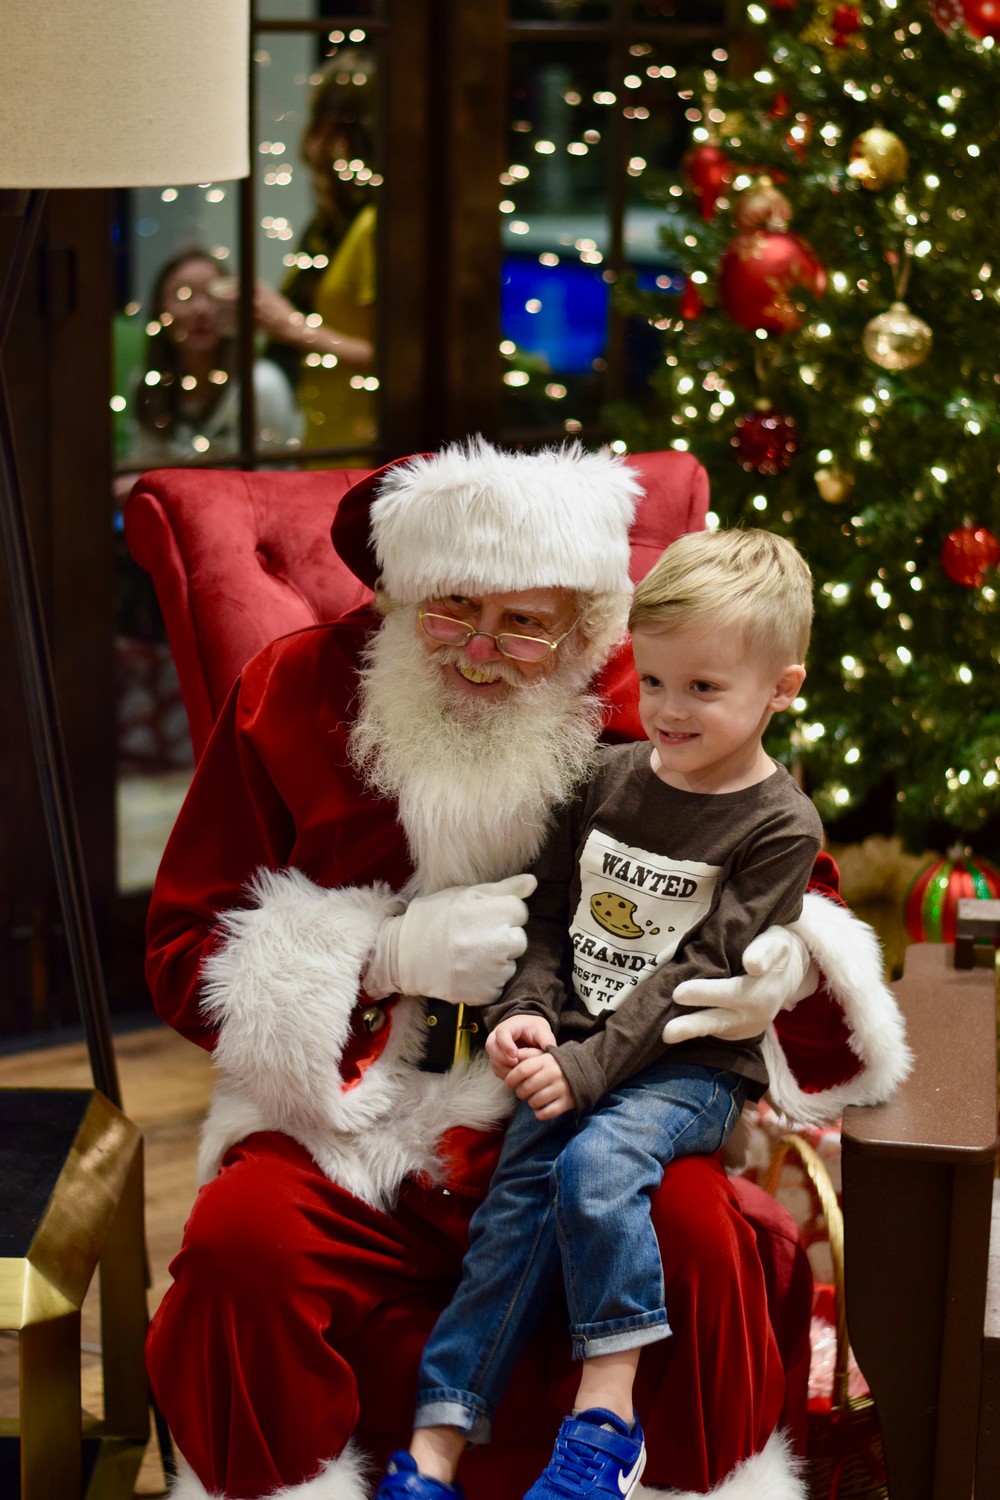 A child from Shearwater meets with Santa Claus at the community’s annual Winter Festival event.